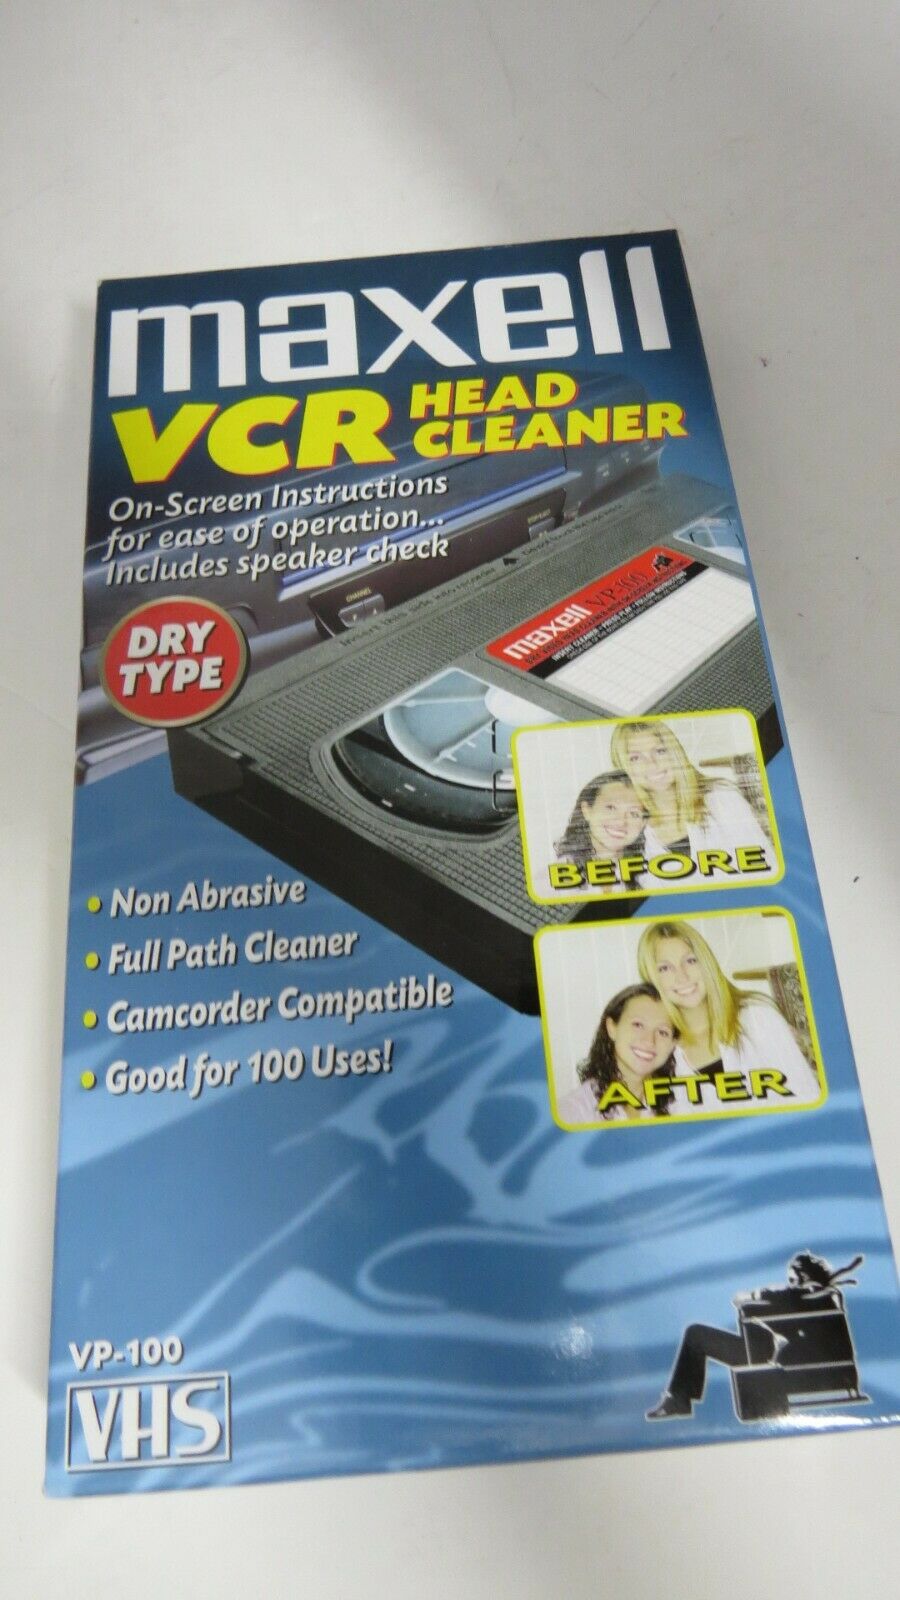 Maxell VCR Head Cleaner VHS Tape VP-100 Dry Type - New - Never USED